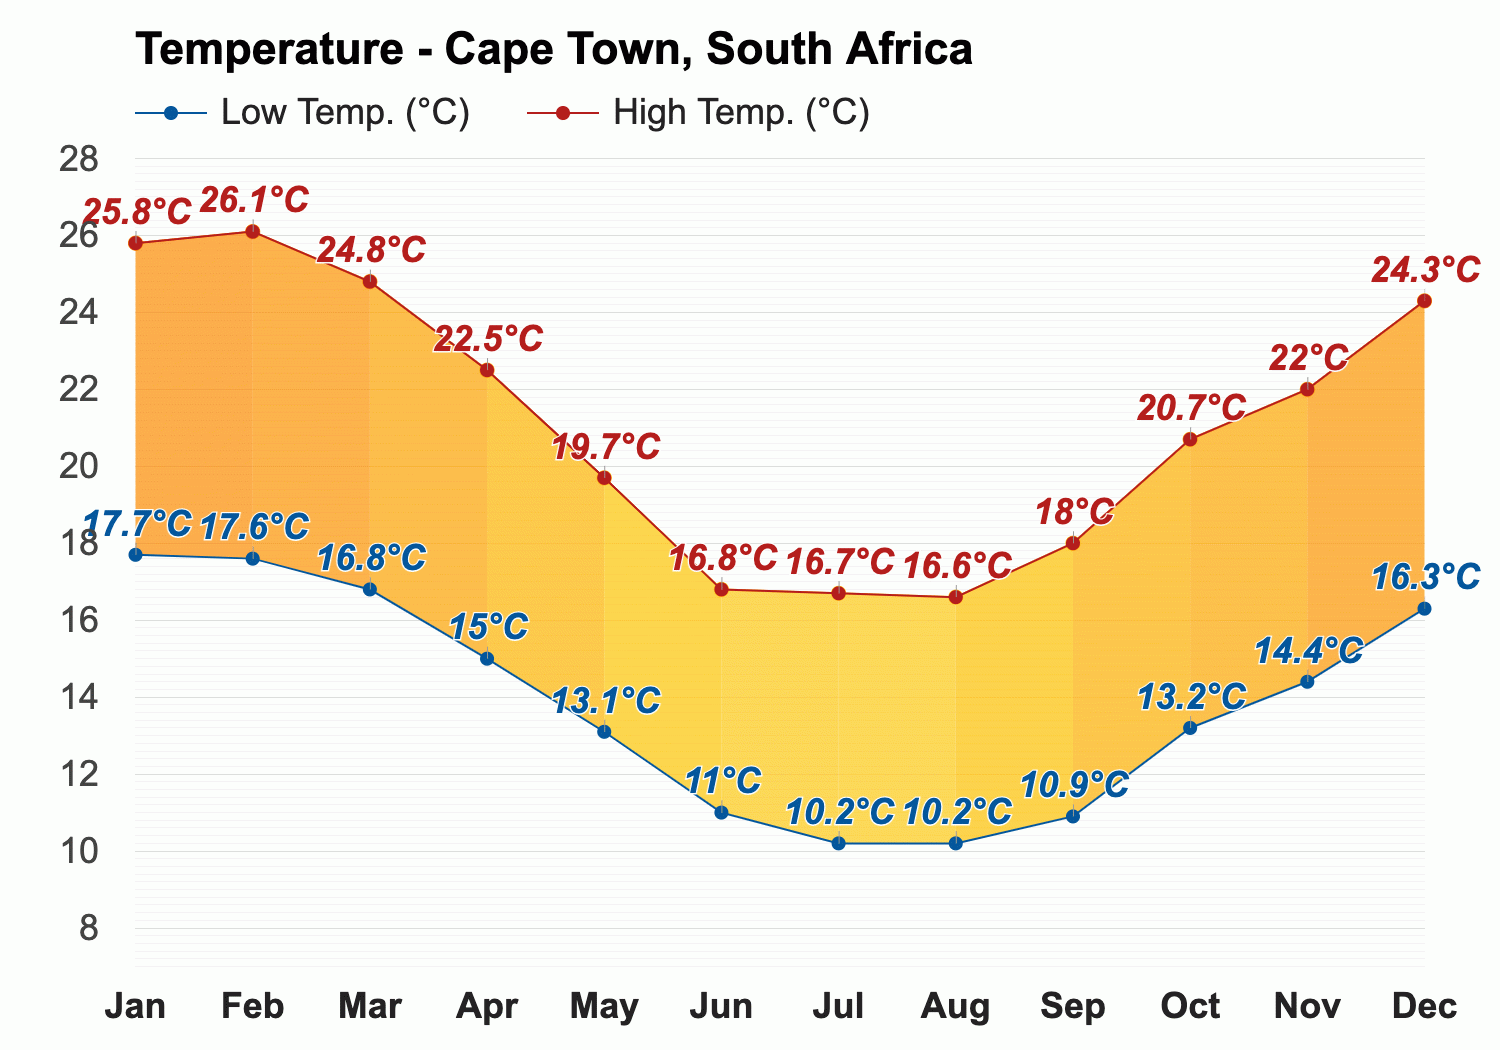 Cape Town, South Africa - September weather forecast and climate  information | Weather Atlas